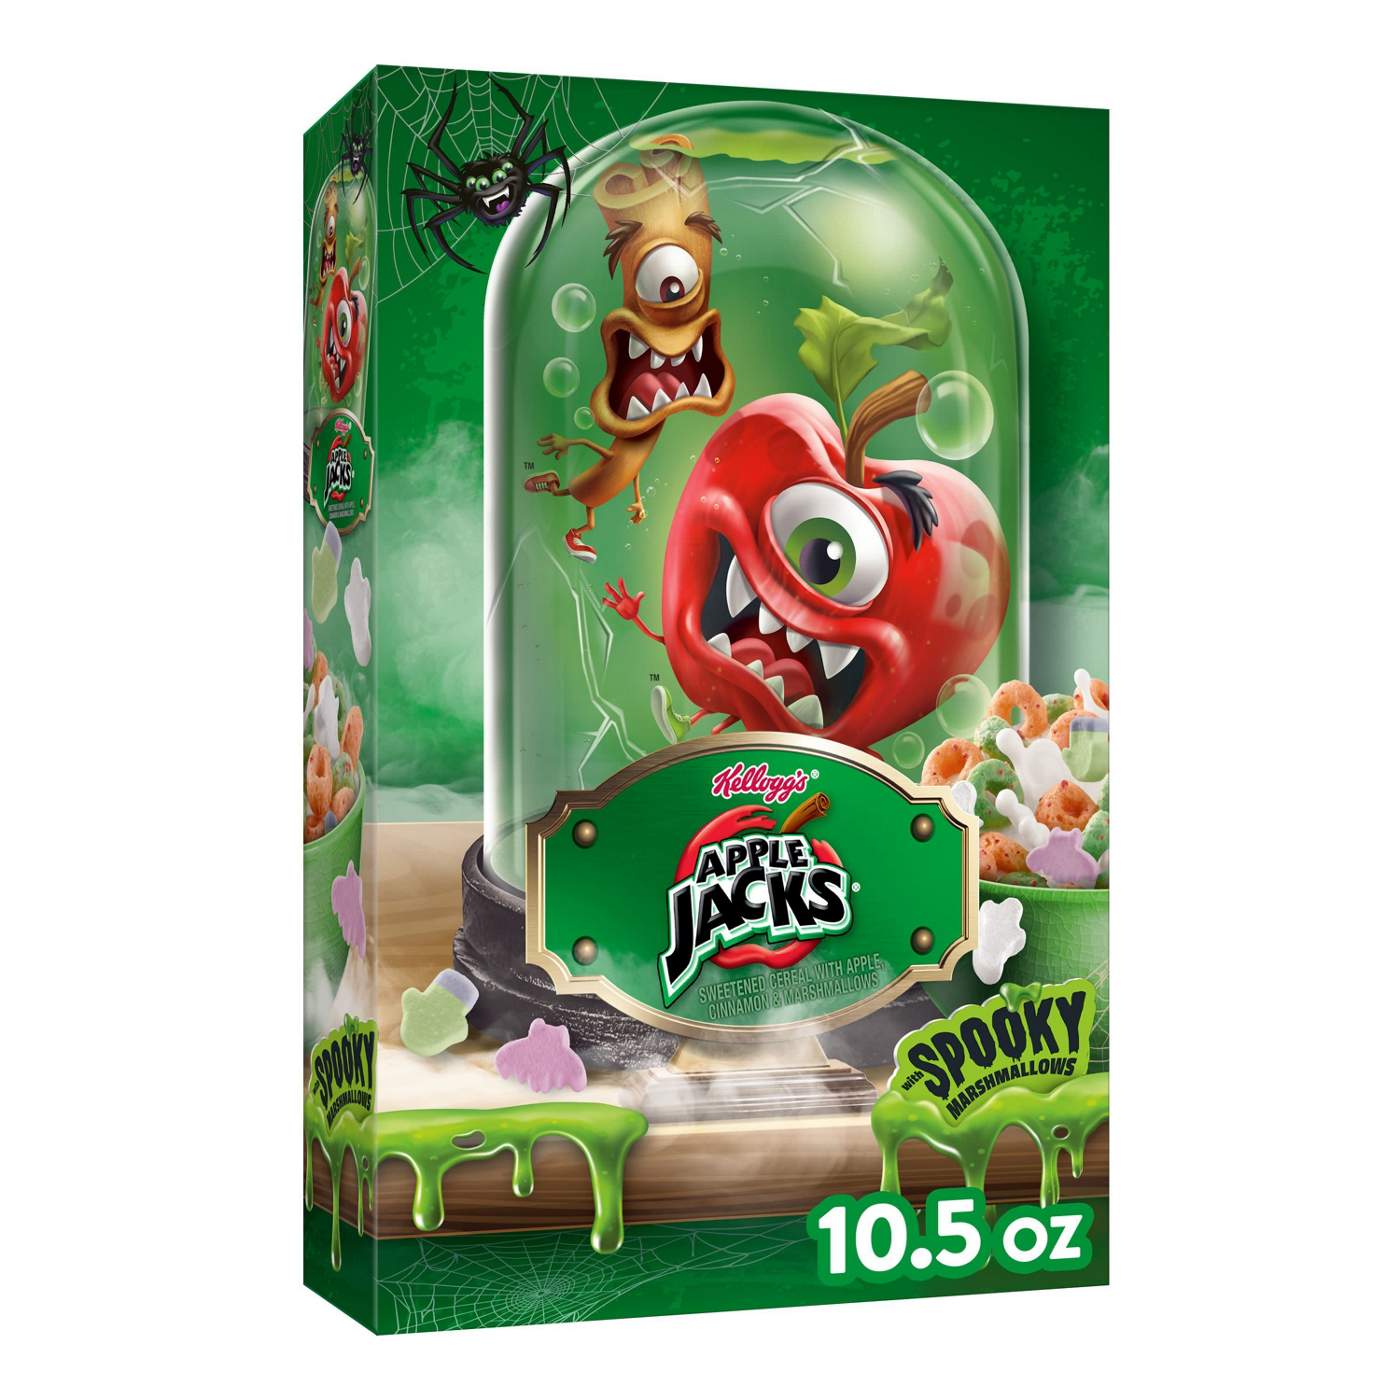 Kellogg's Apple Jacks with Spooky Marshmallows Cereal; image 1 of 3